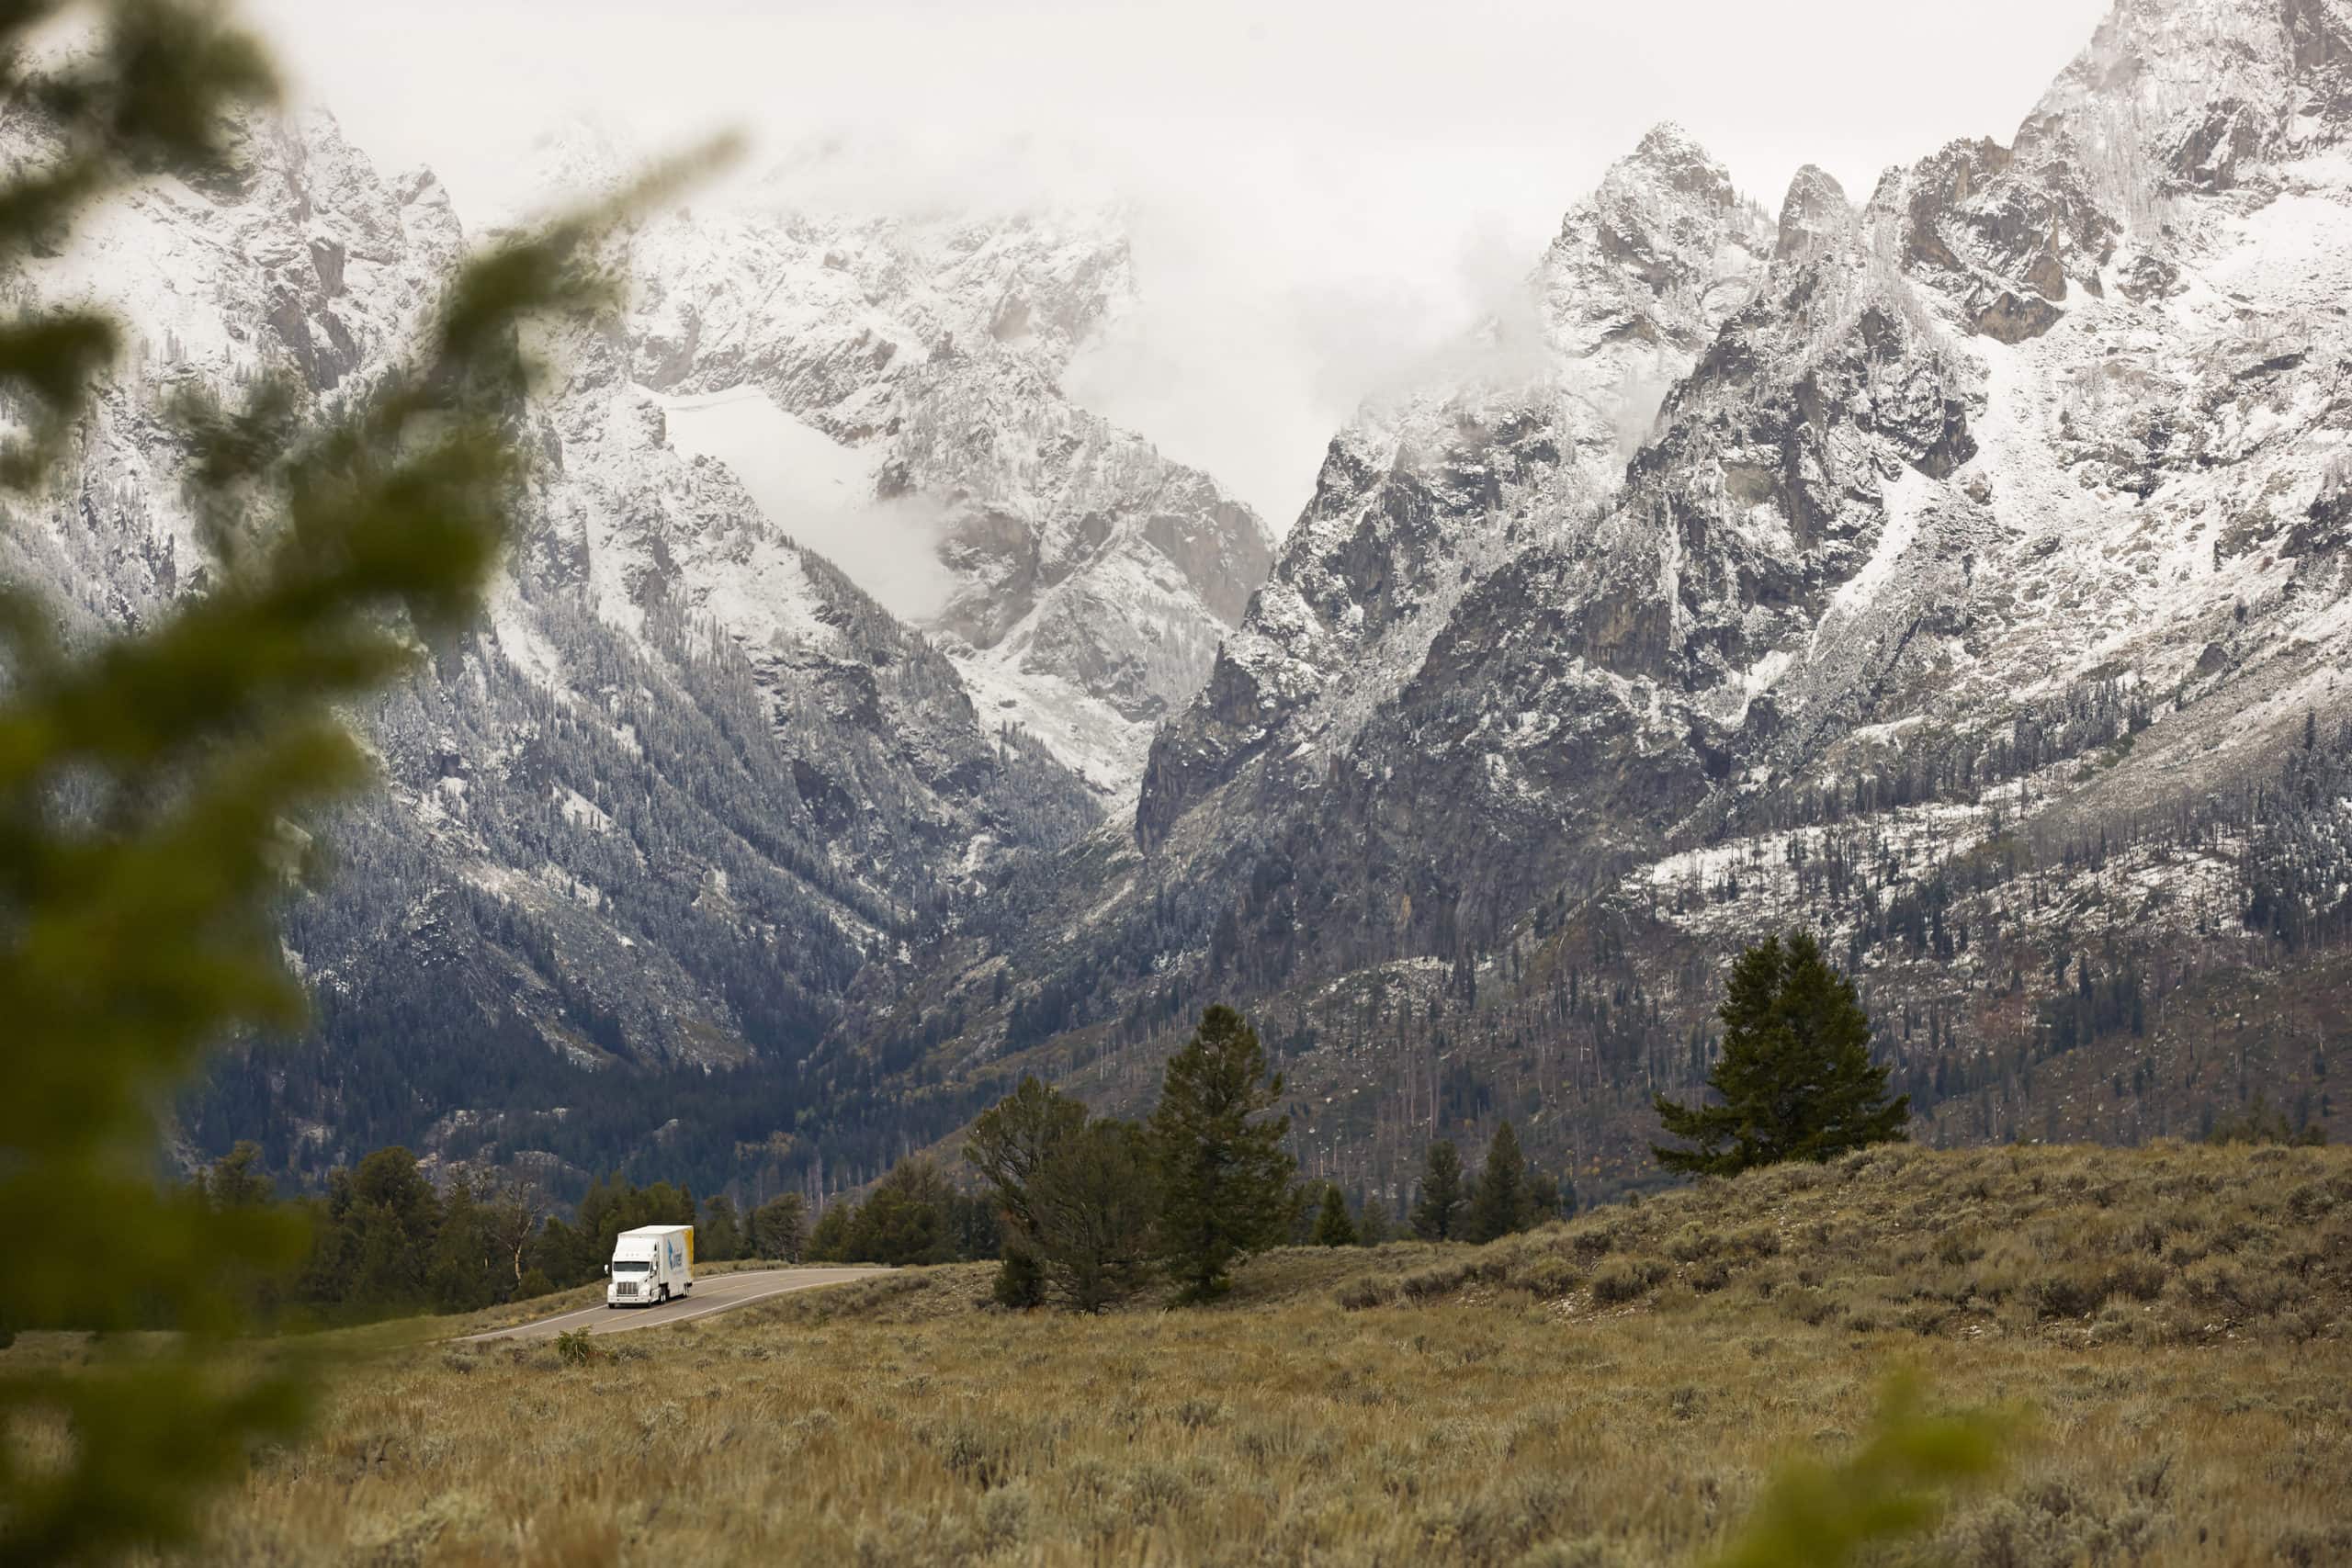 United Van Lines moving truck driving in snowy winter mountains